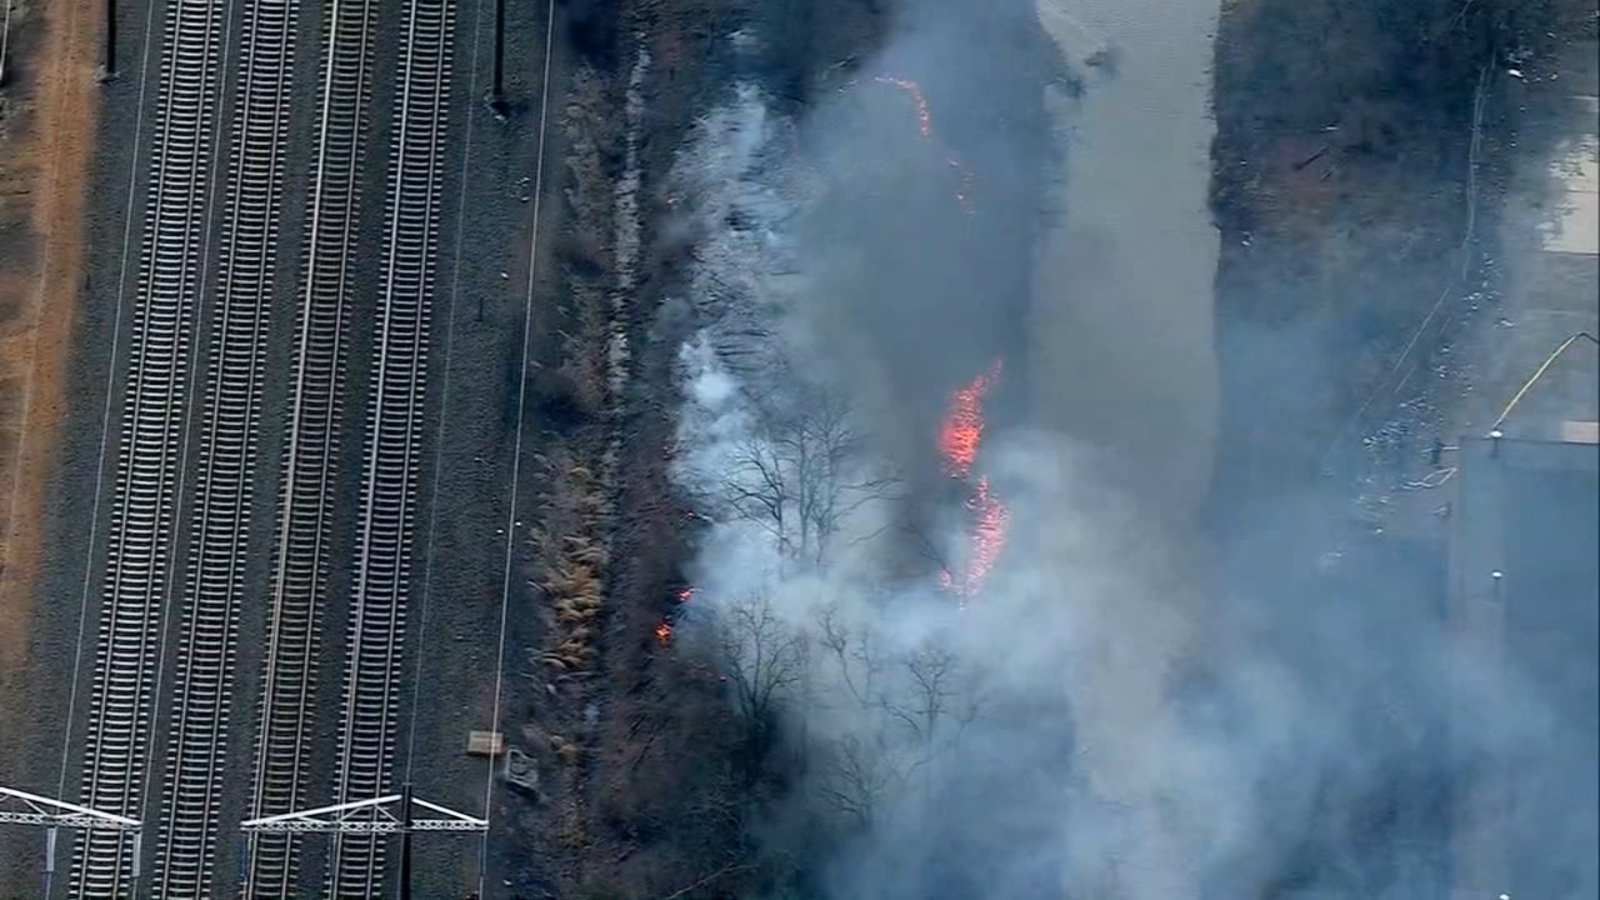 Rail service between NY Penn Station, Philadelphia resumes with delays after NJ brush fires